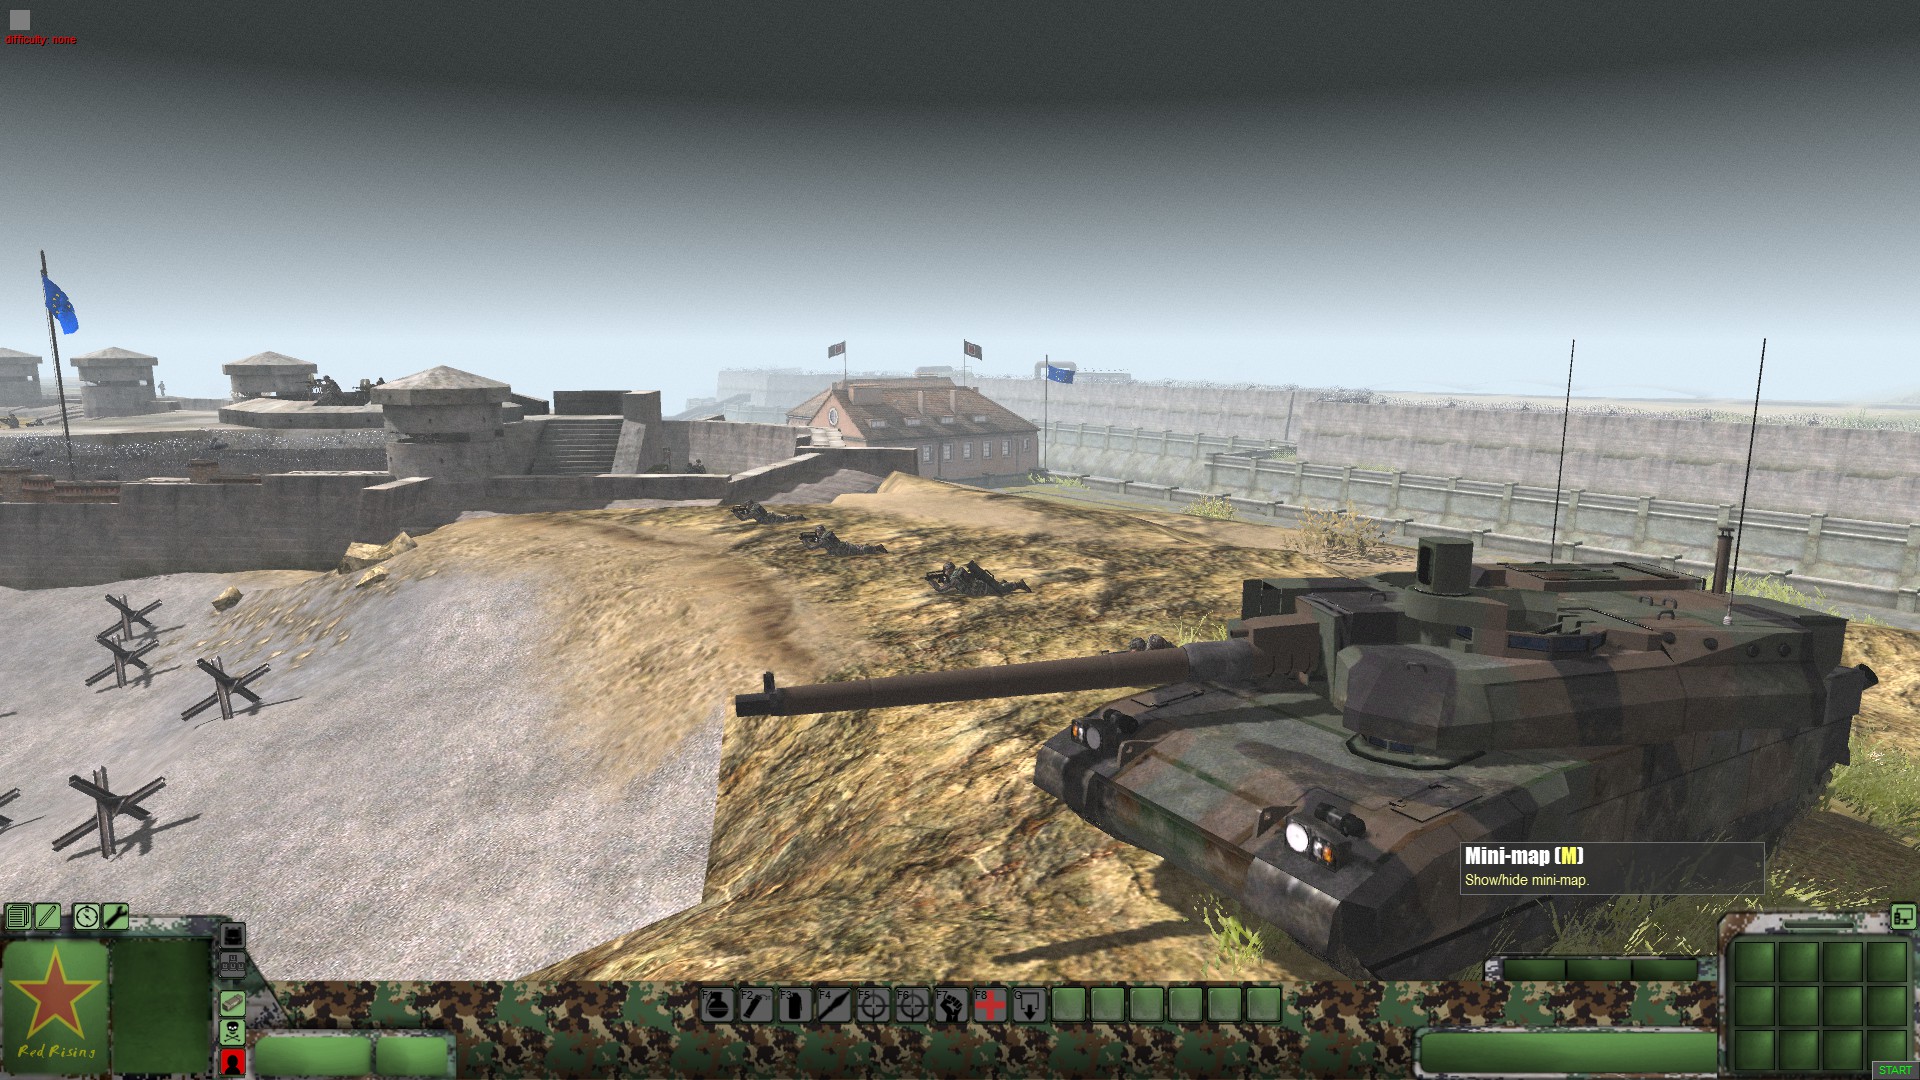 Nice Tank We Have Here image - French Island Fortress - Red Rising mod for Men of War: Assault Squad 2 - Mod